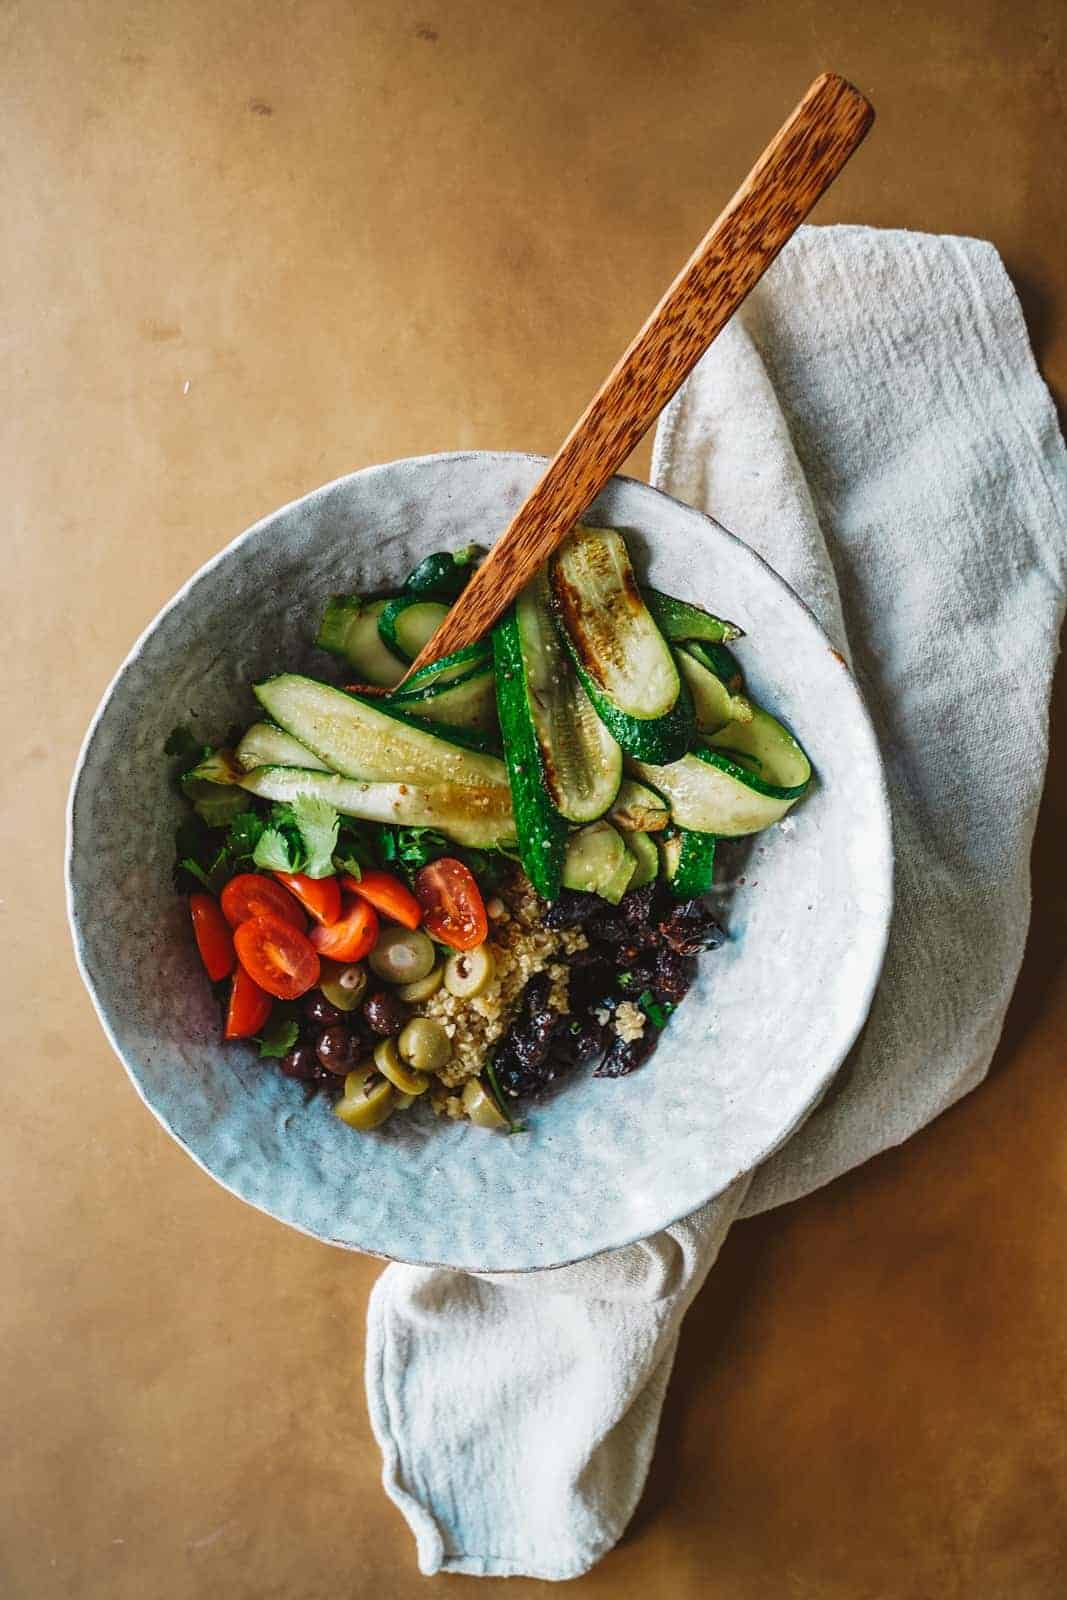 Loaded Zucchini and Quinoa Salad with Prunes